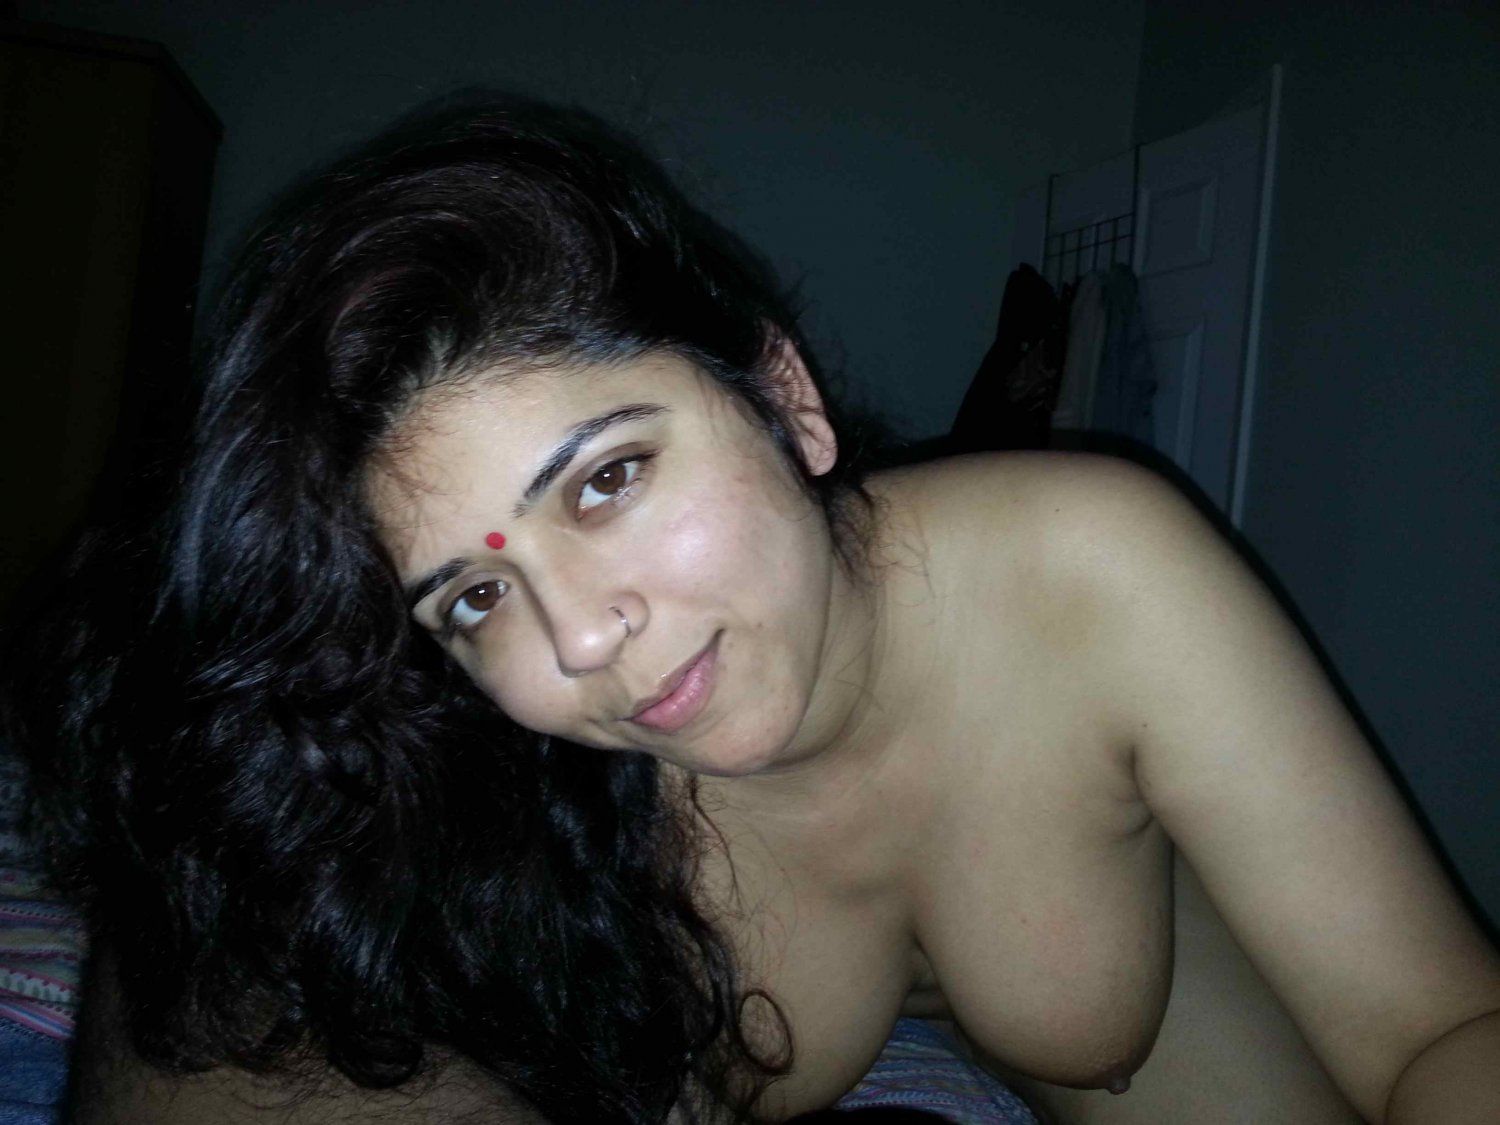 Hot indian wife - Porn Videos and Photos image